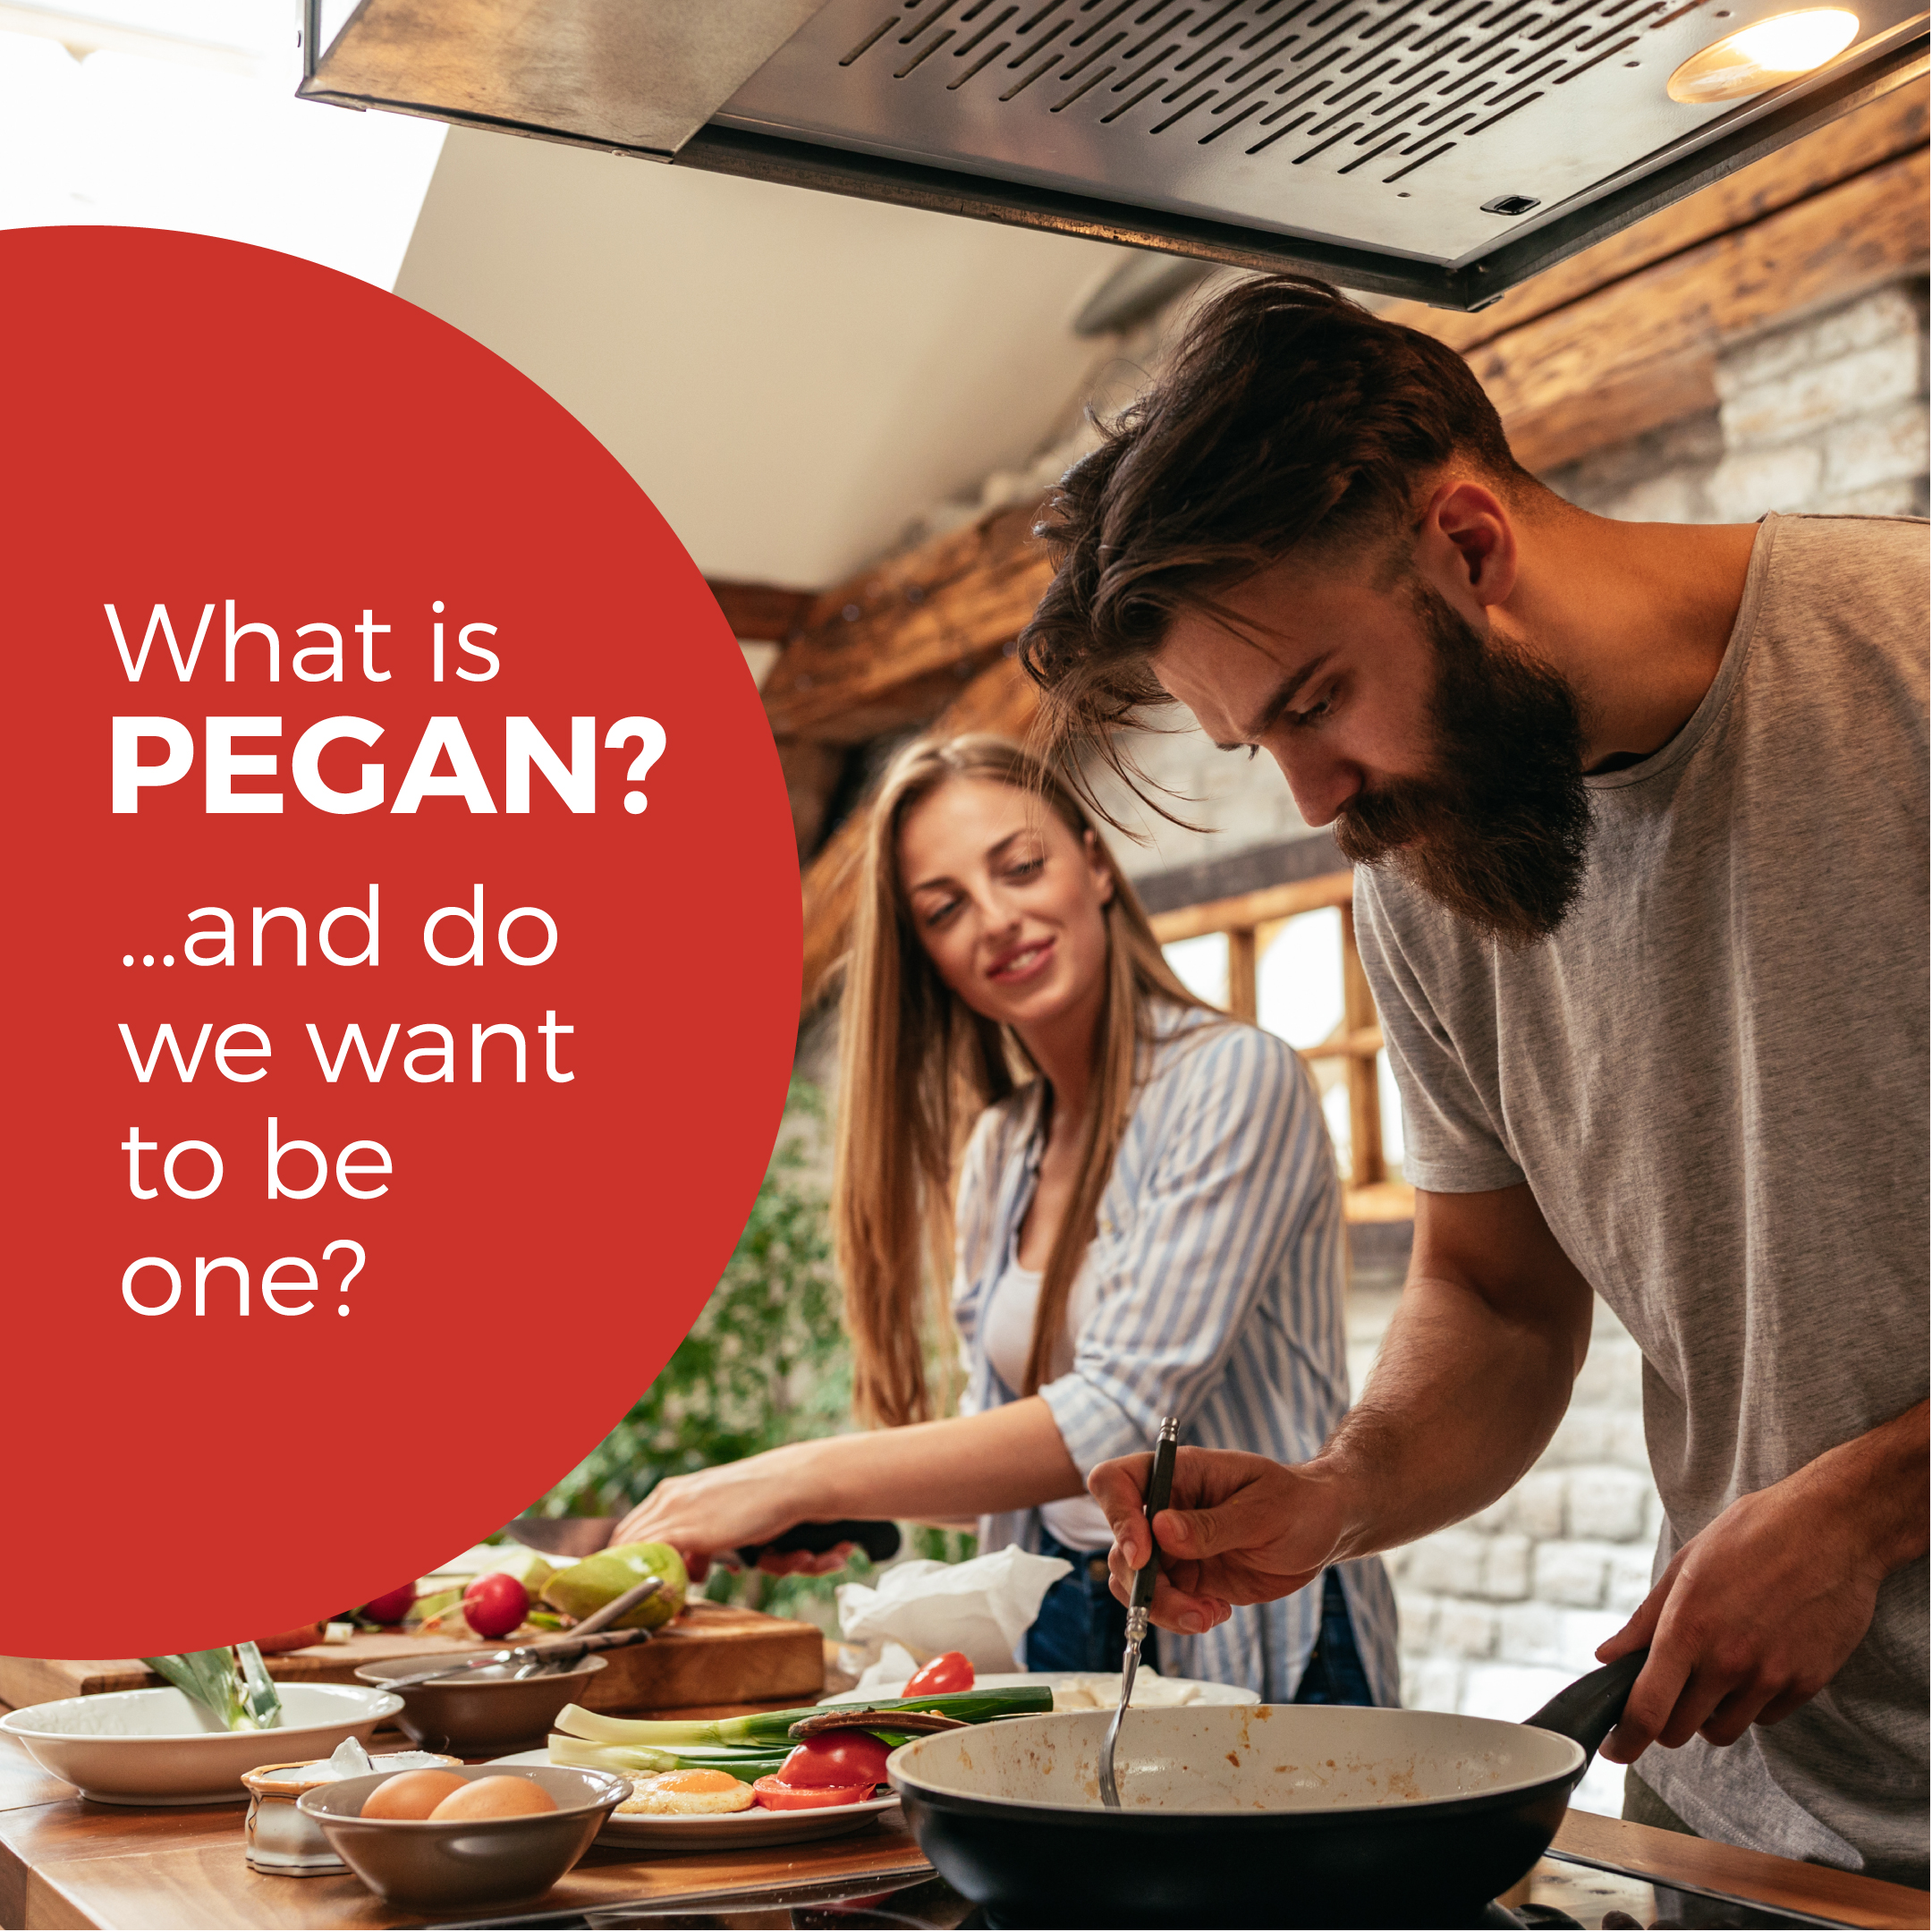 What is a Pegan and do we want to be one?